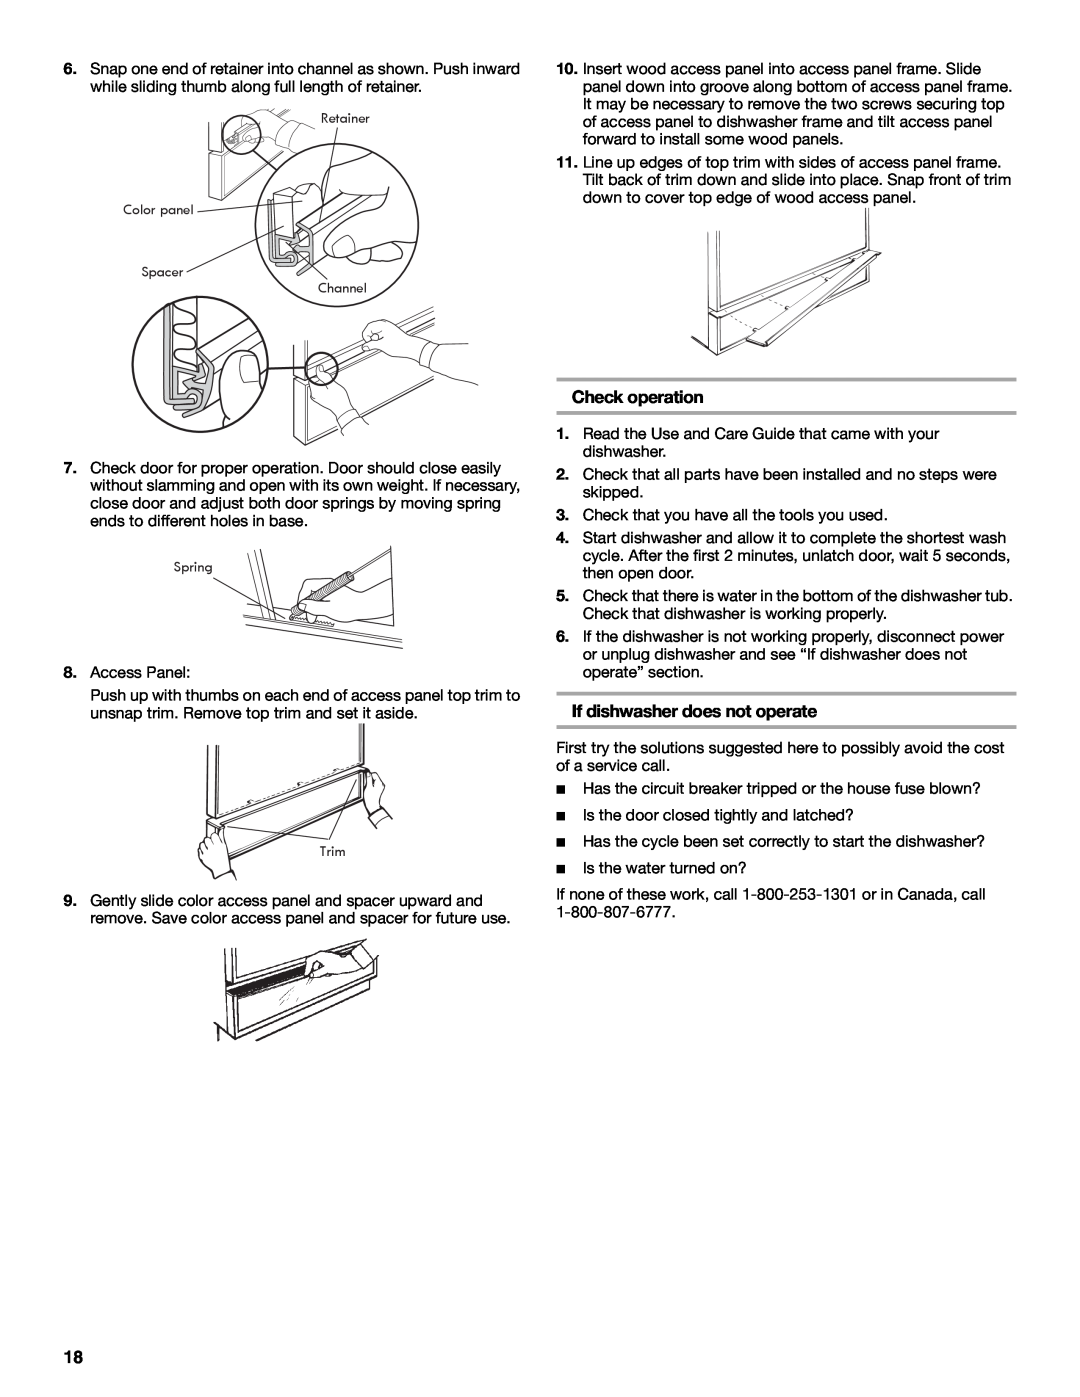 Whirlpool W10282559A installation instructions Check operation, If dishwasher does not operate 